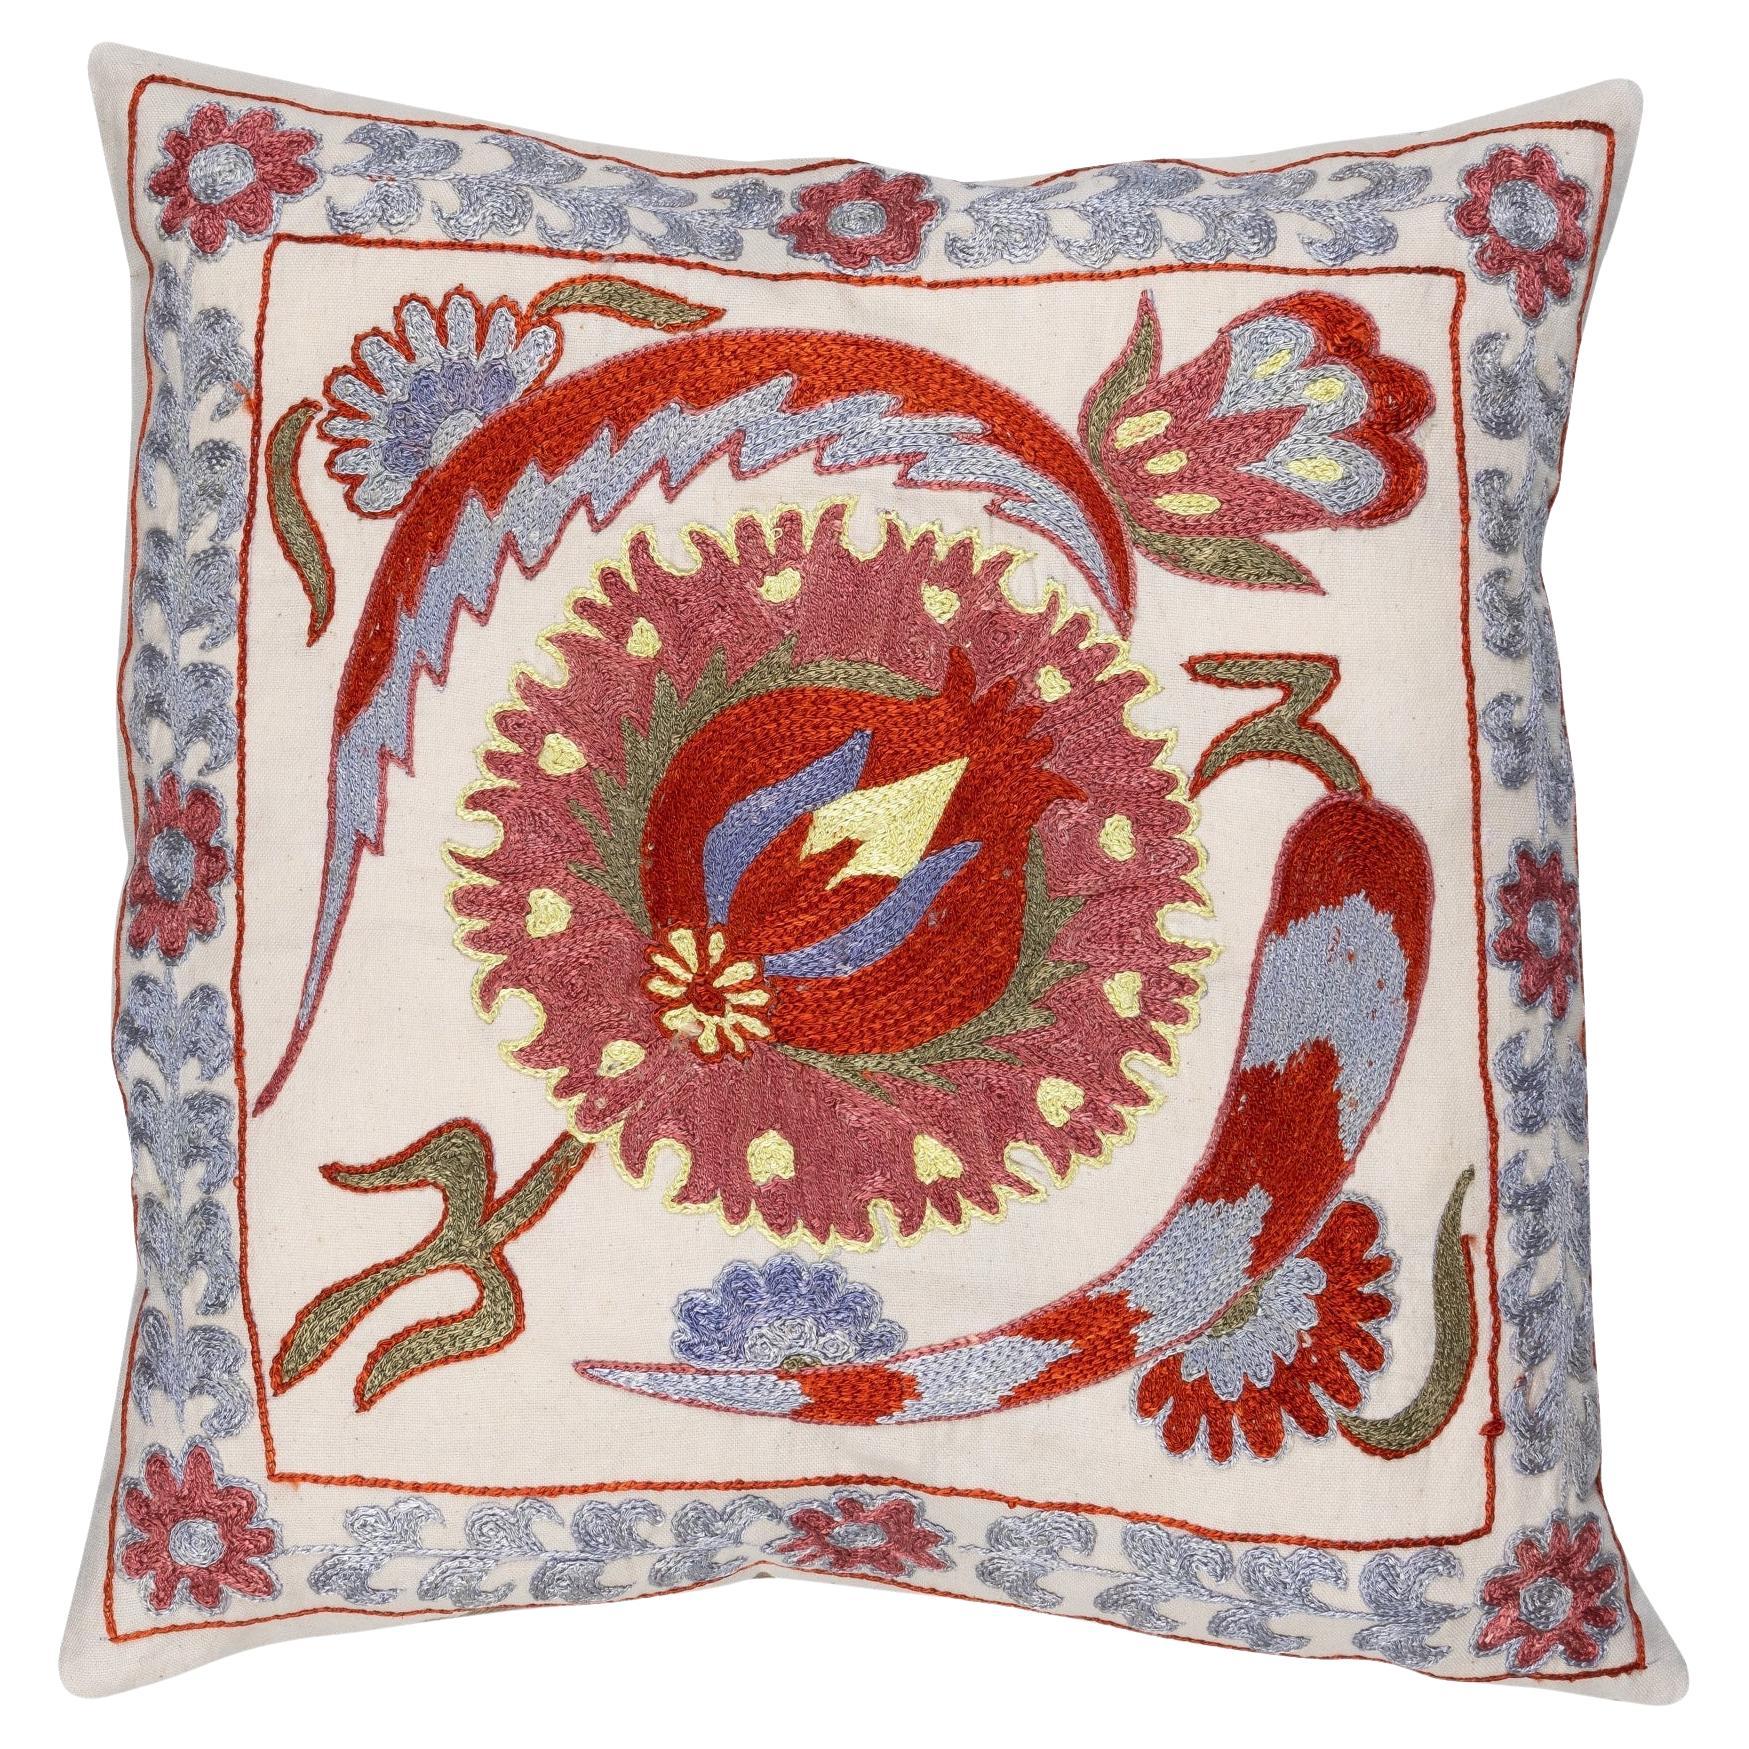 17"x17" New Silk Embroidery Suzani Cushion Cover, Fantastic Throw Pillow Cover